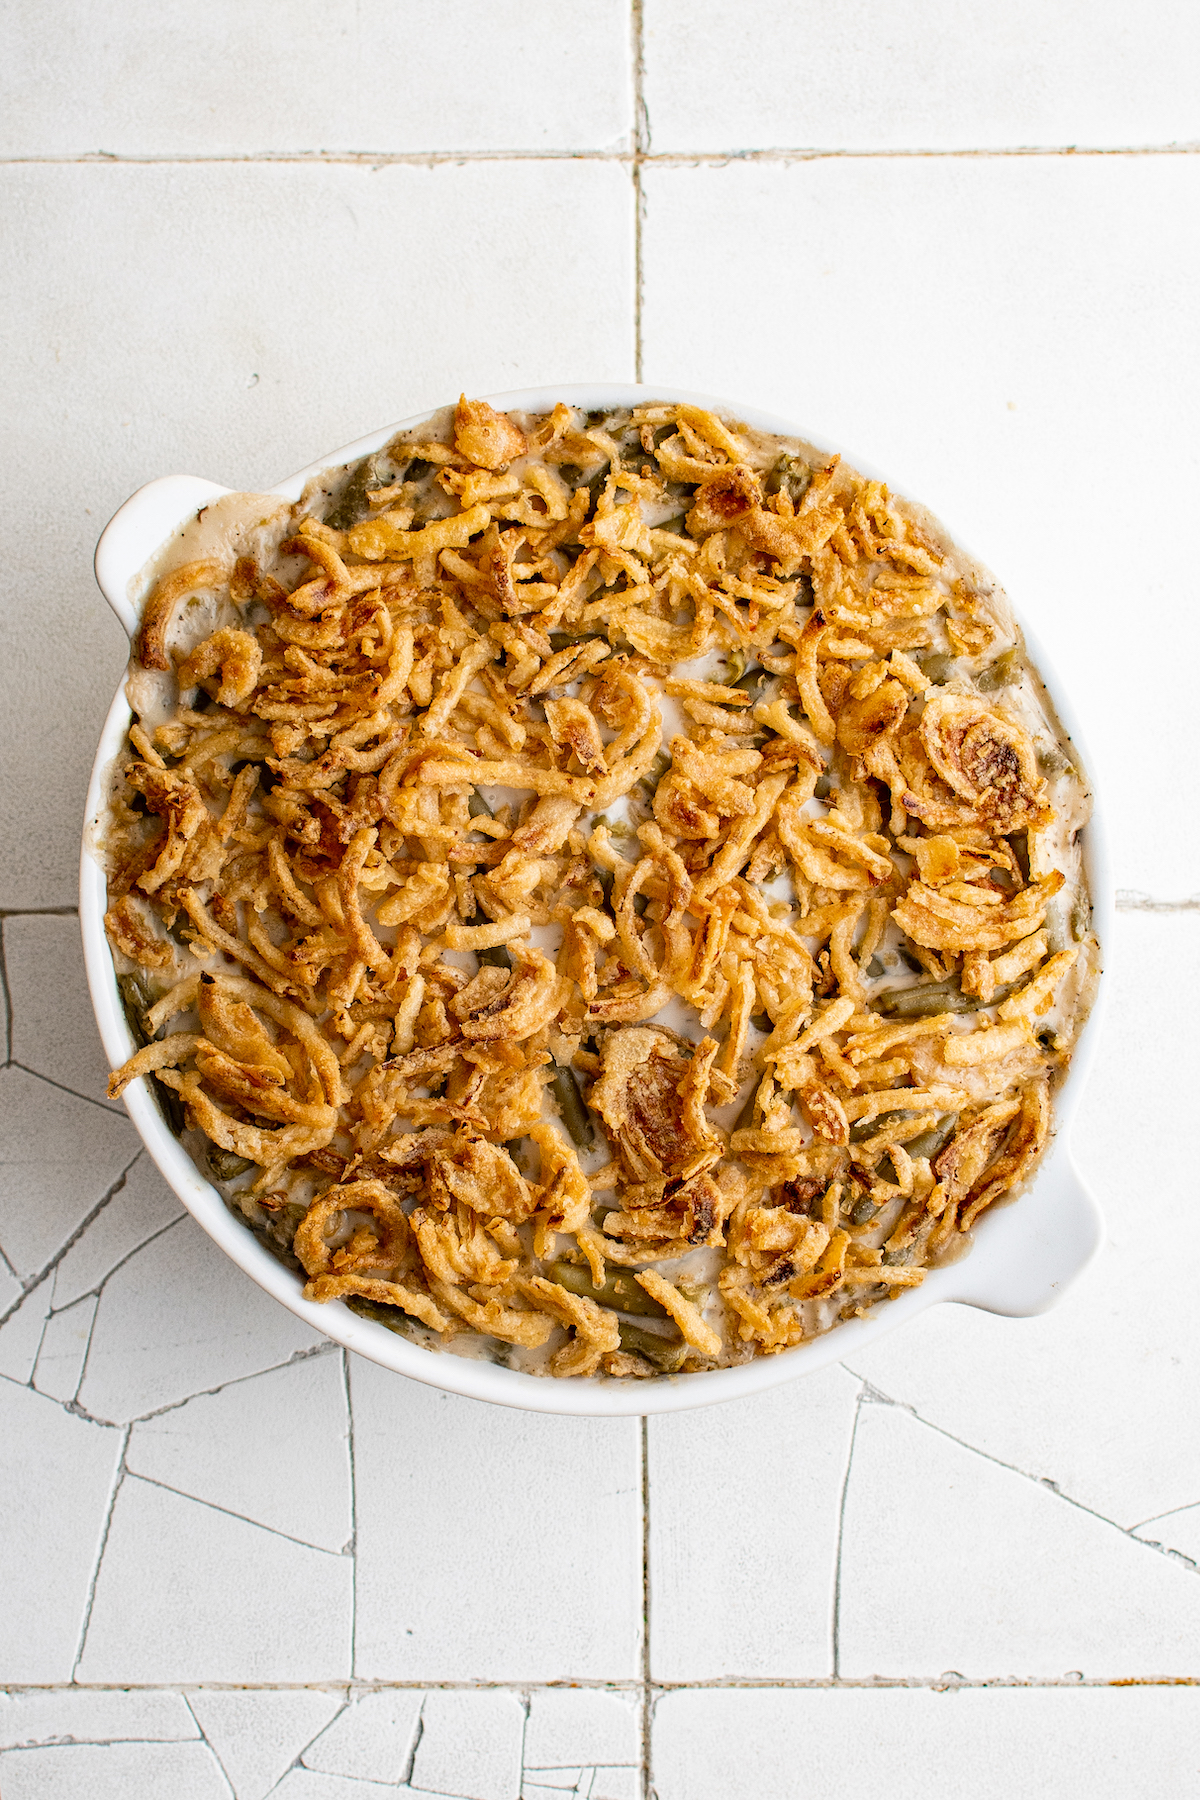 Baked green bean casserole with golden-brown fried onions on top.